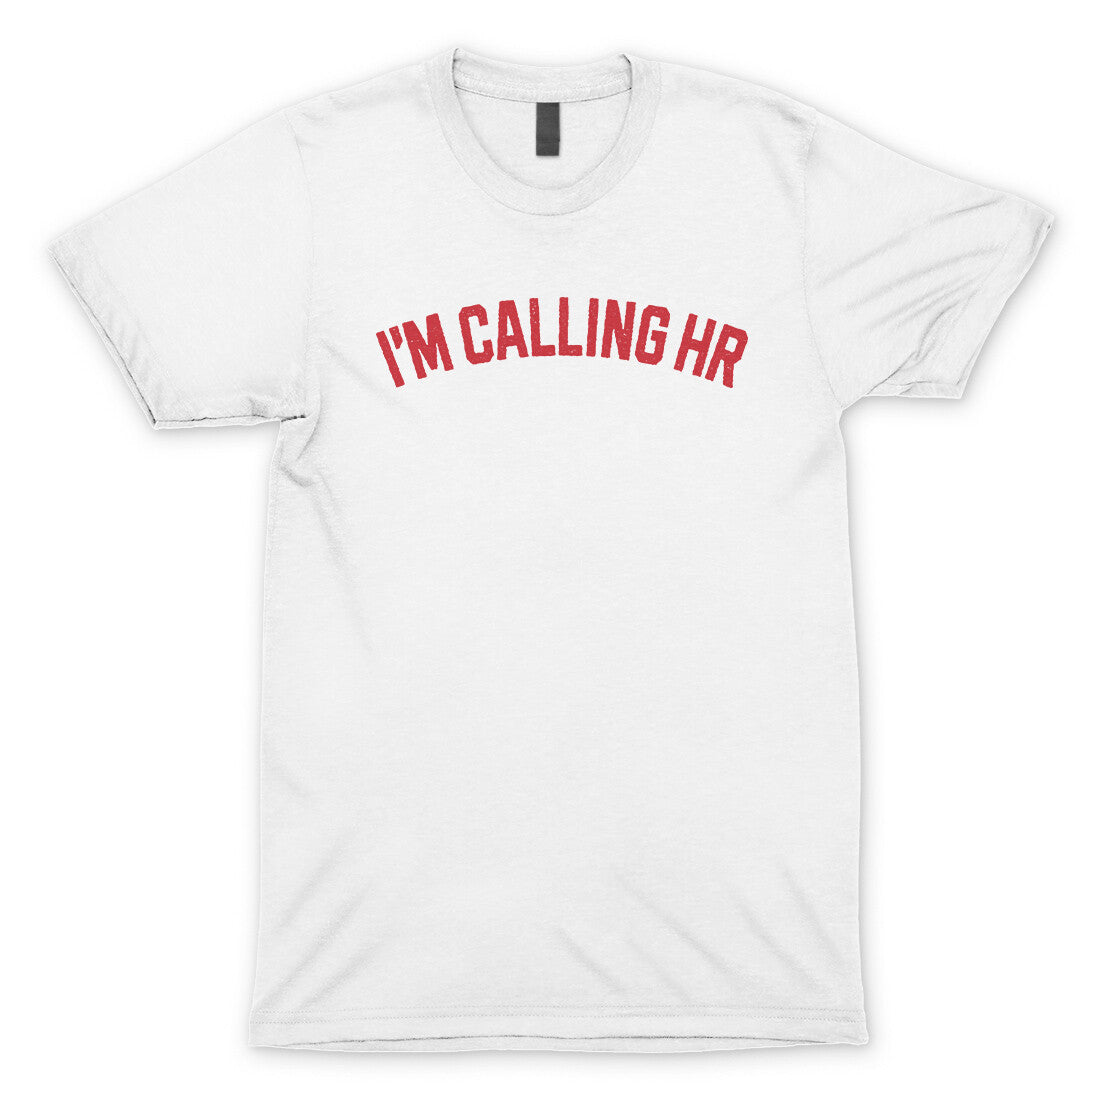 I'm Calling HR in White Color